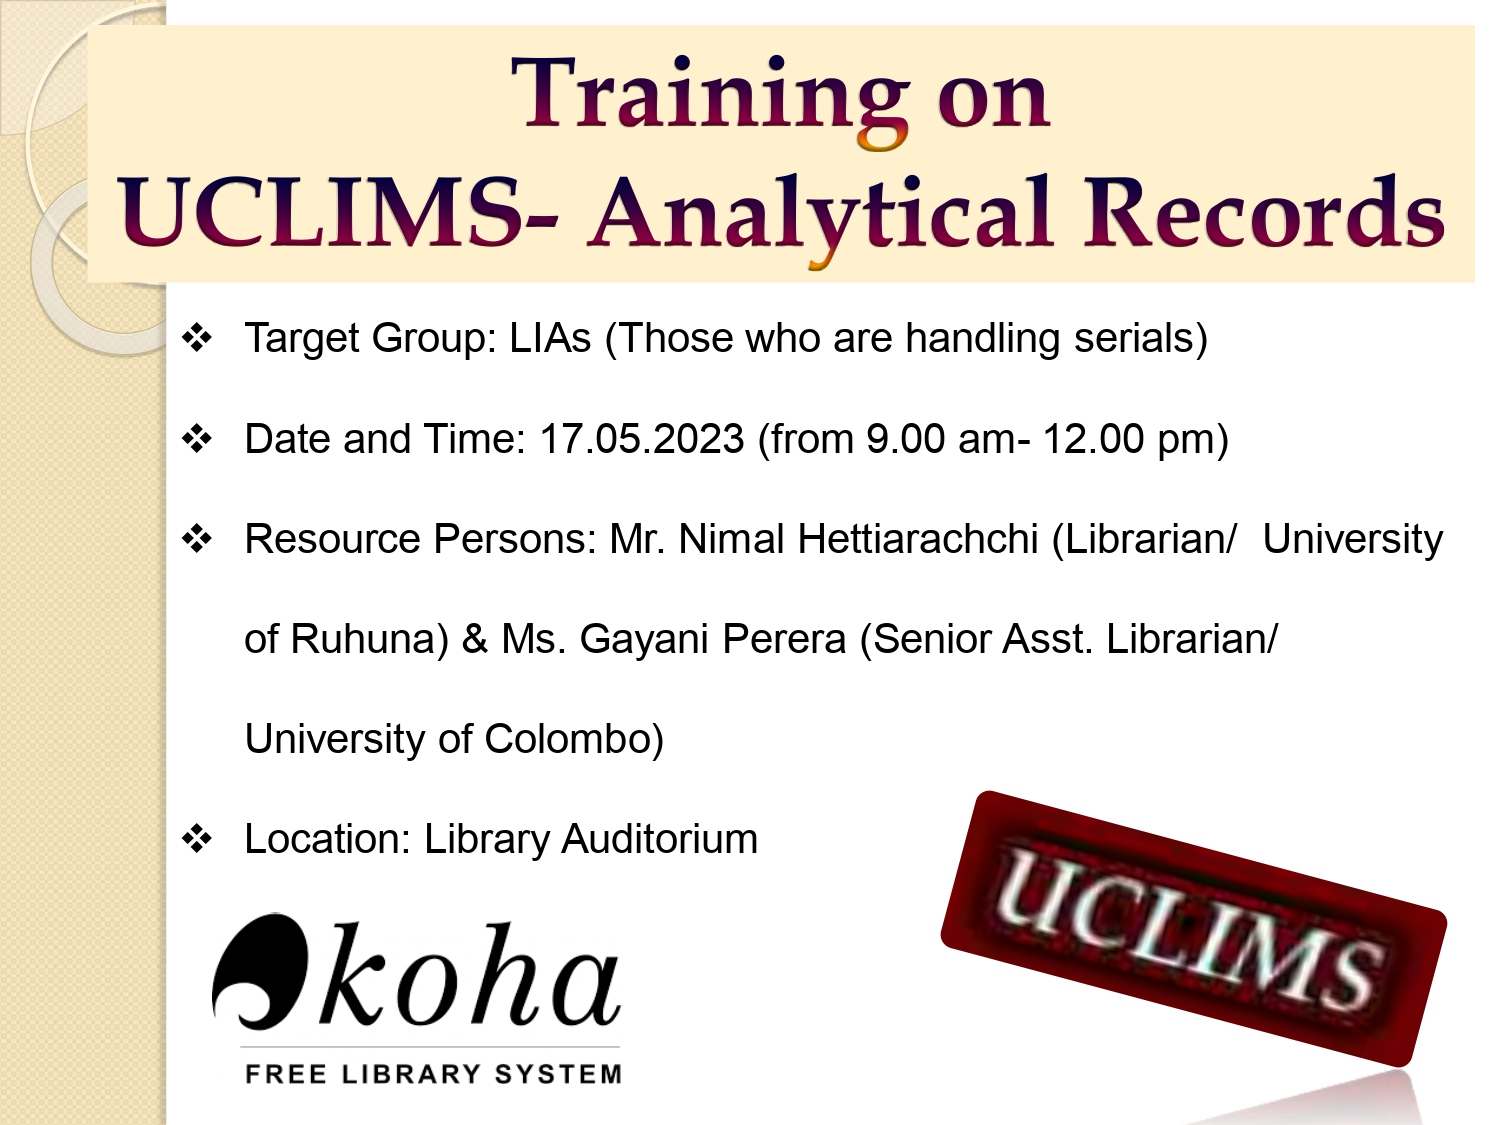 Training on UCLIMS- Analytical Records